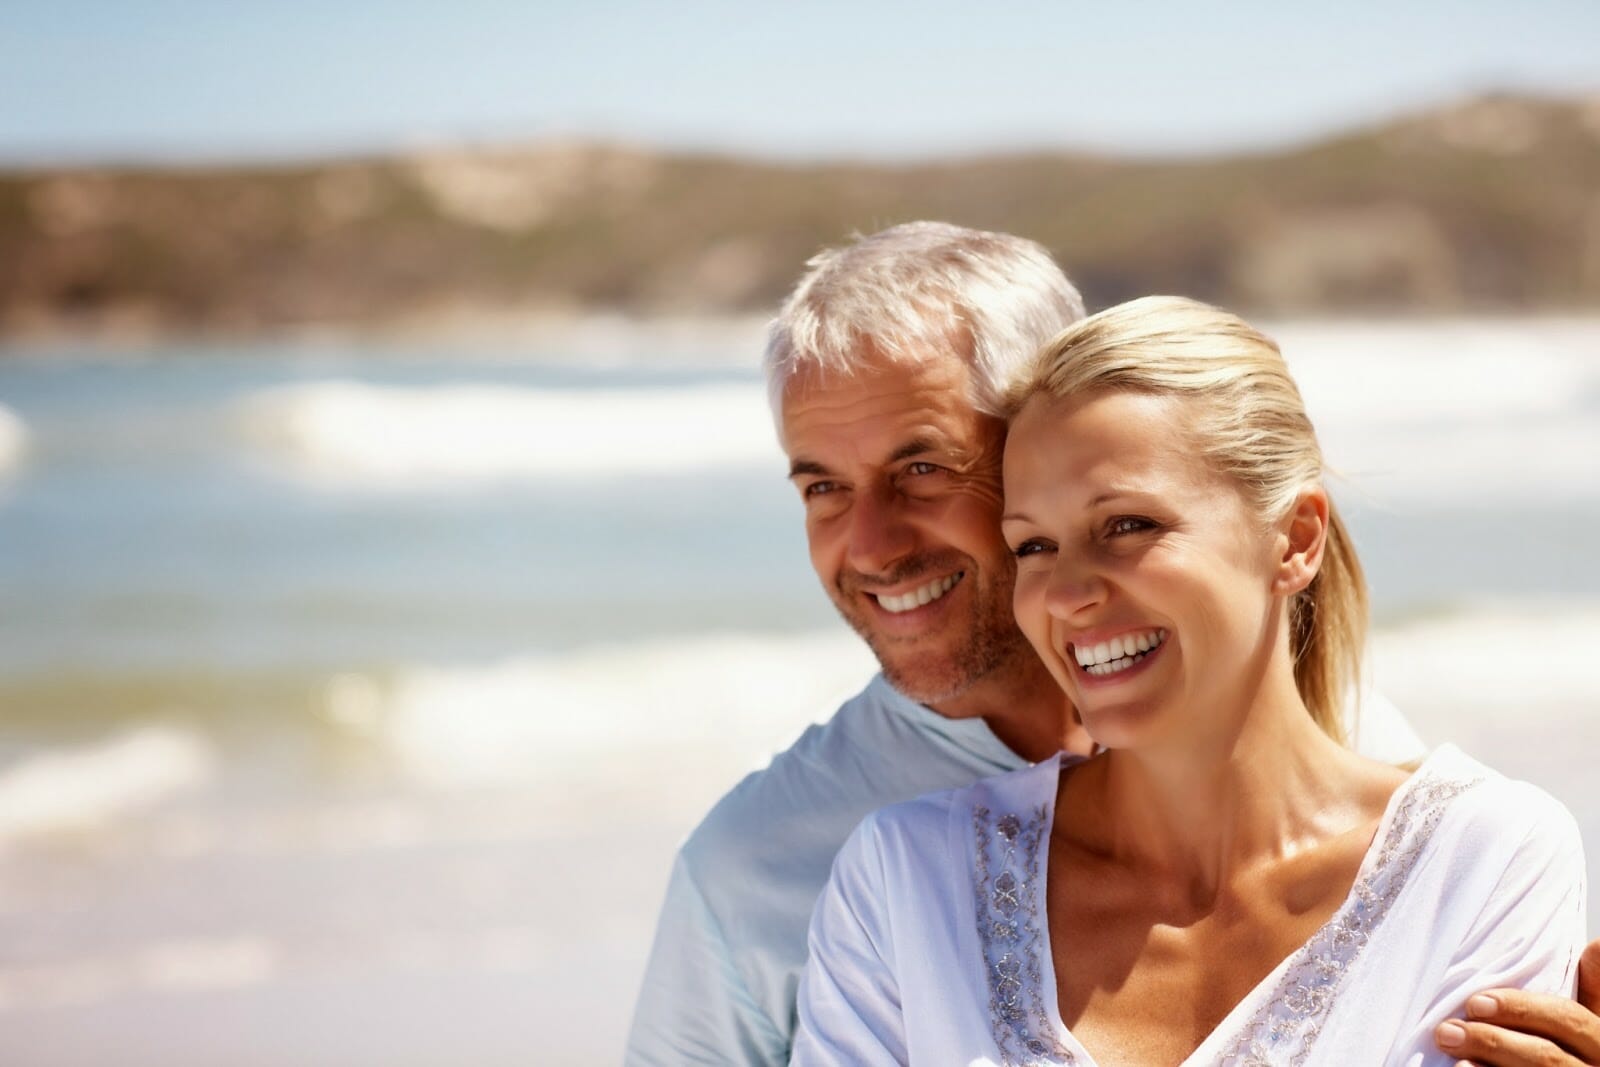 How and Where To Meet Singles Over 40 in 2022 - Top Places To Find Them